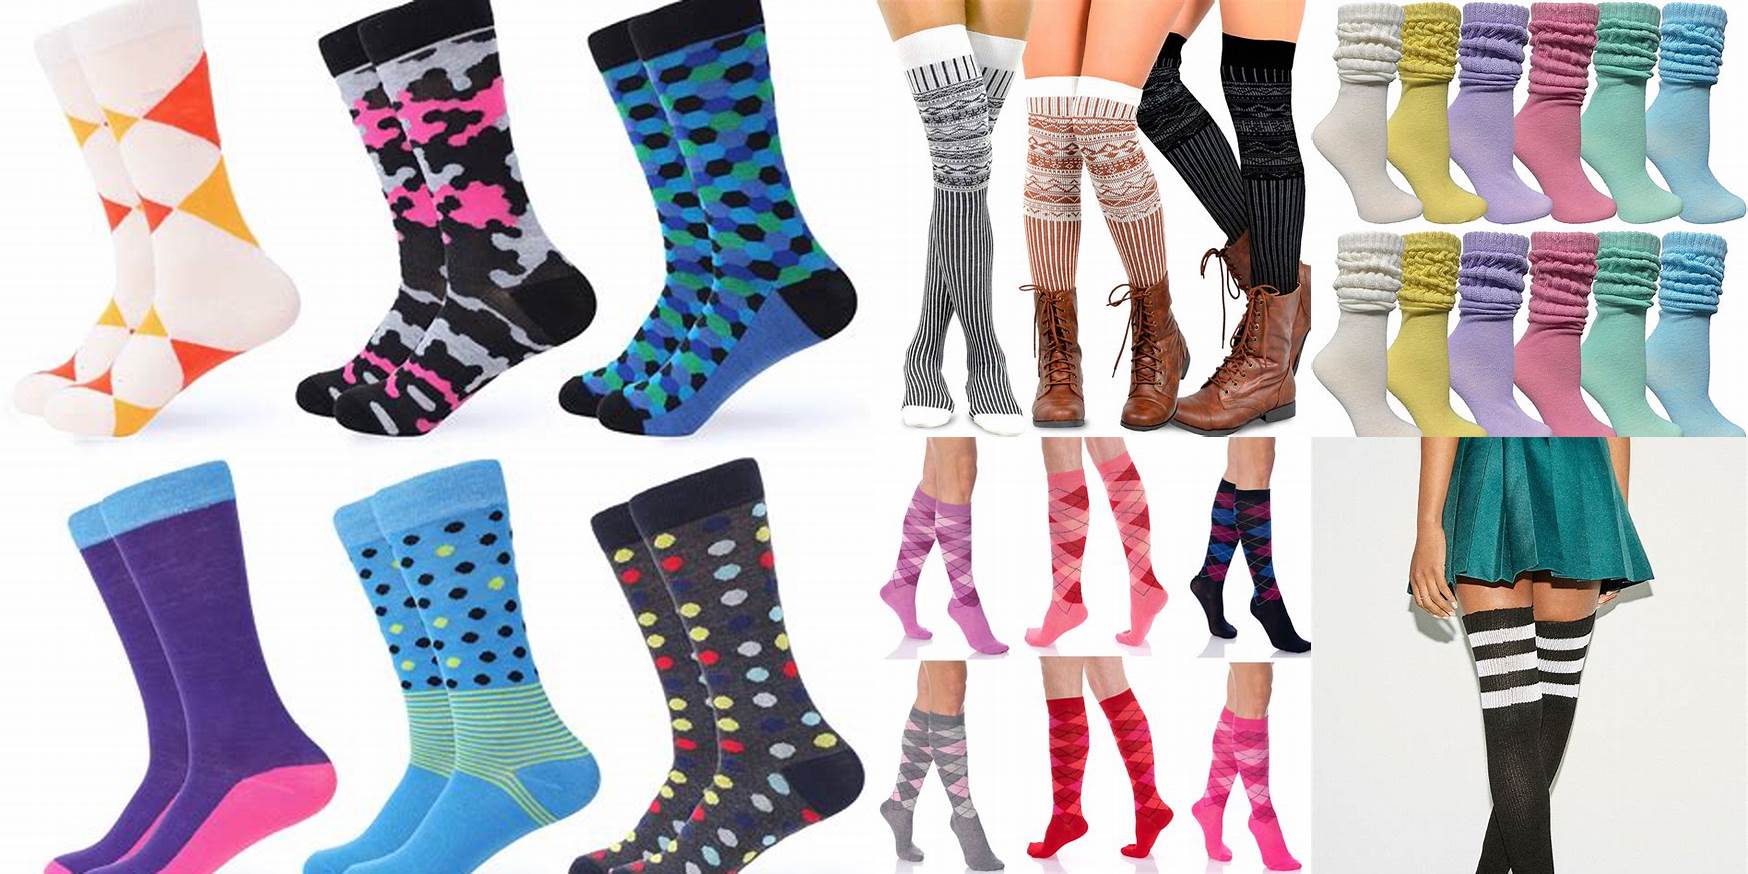 Are Socks Clothing